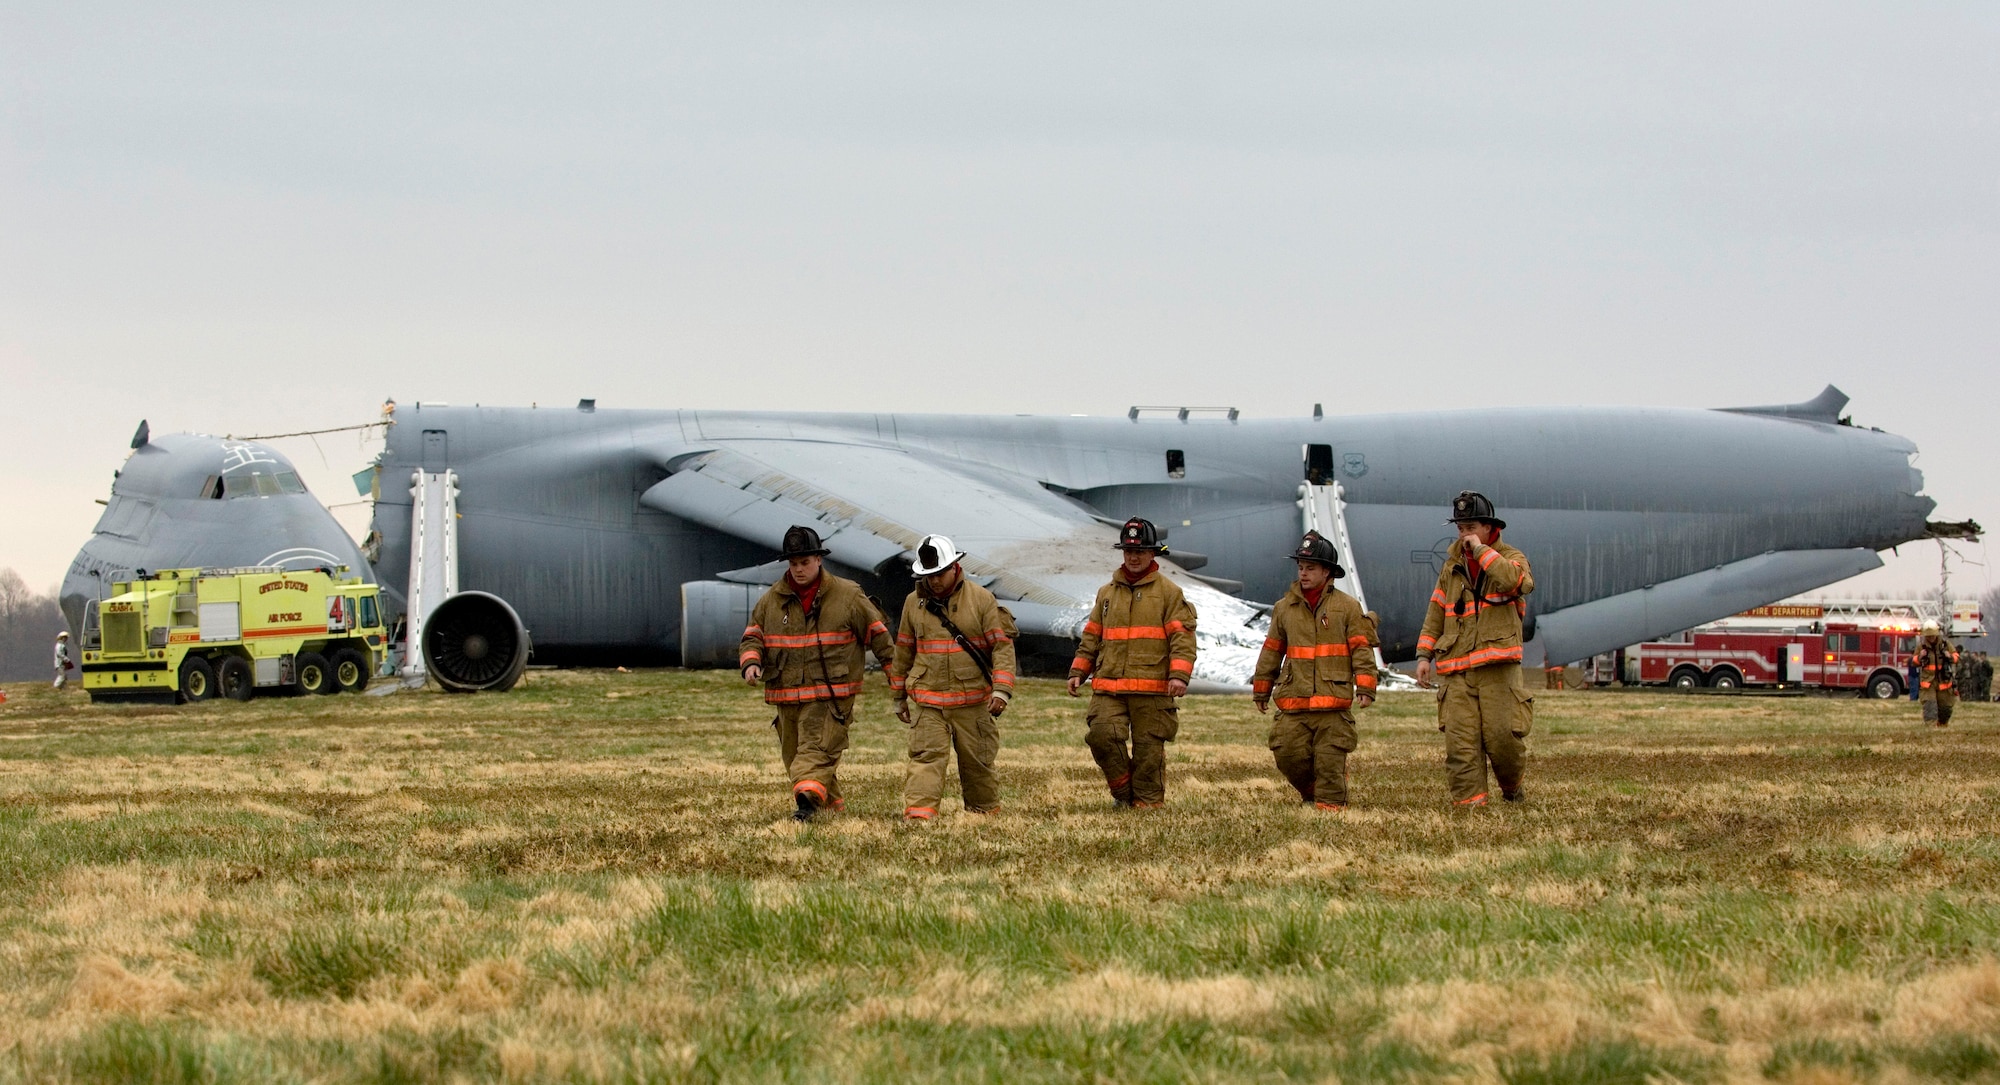 Emergency responders are on the scene of a C-5 Galaxy crash today, April 3, 2006 at Dover Air Force Base, Del. (U.S. Air Force photo/Doug Curran)
 
